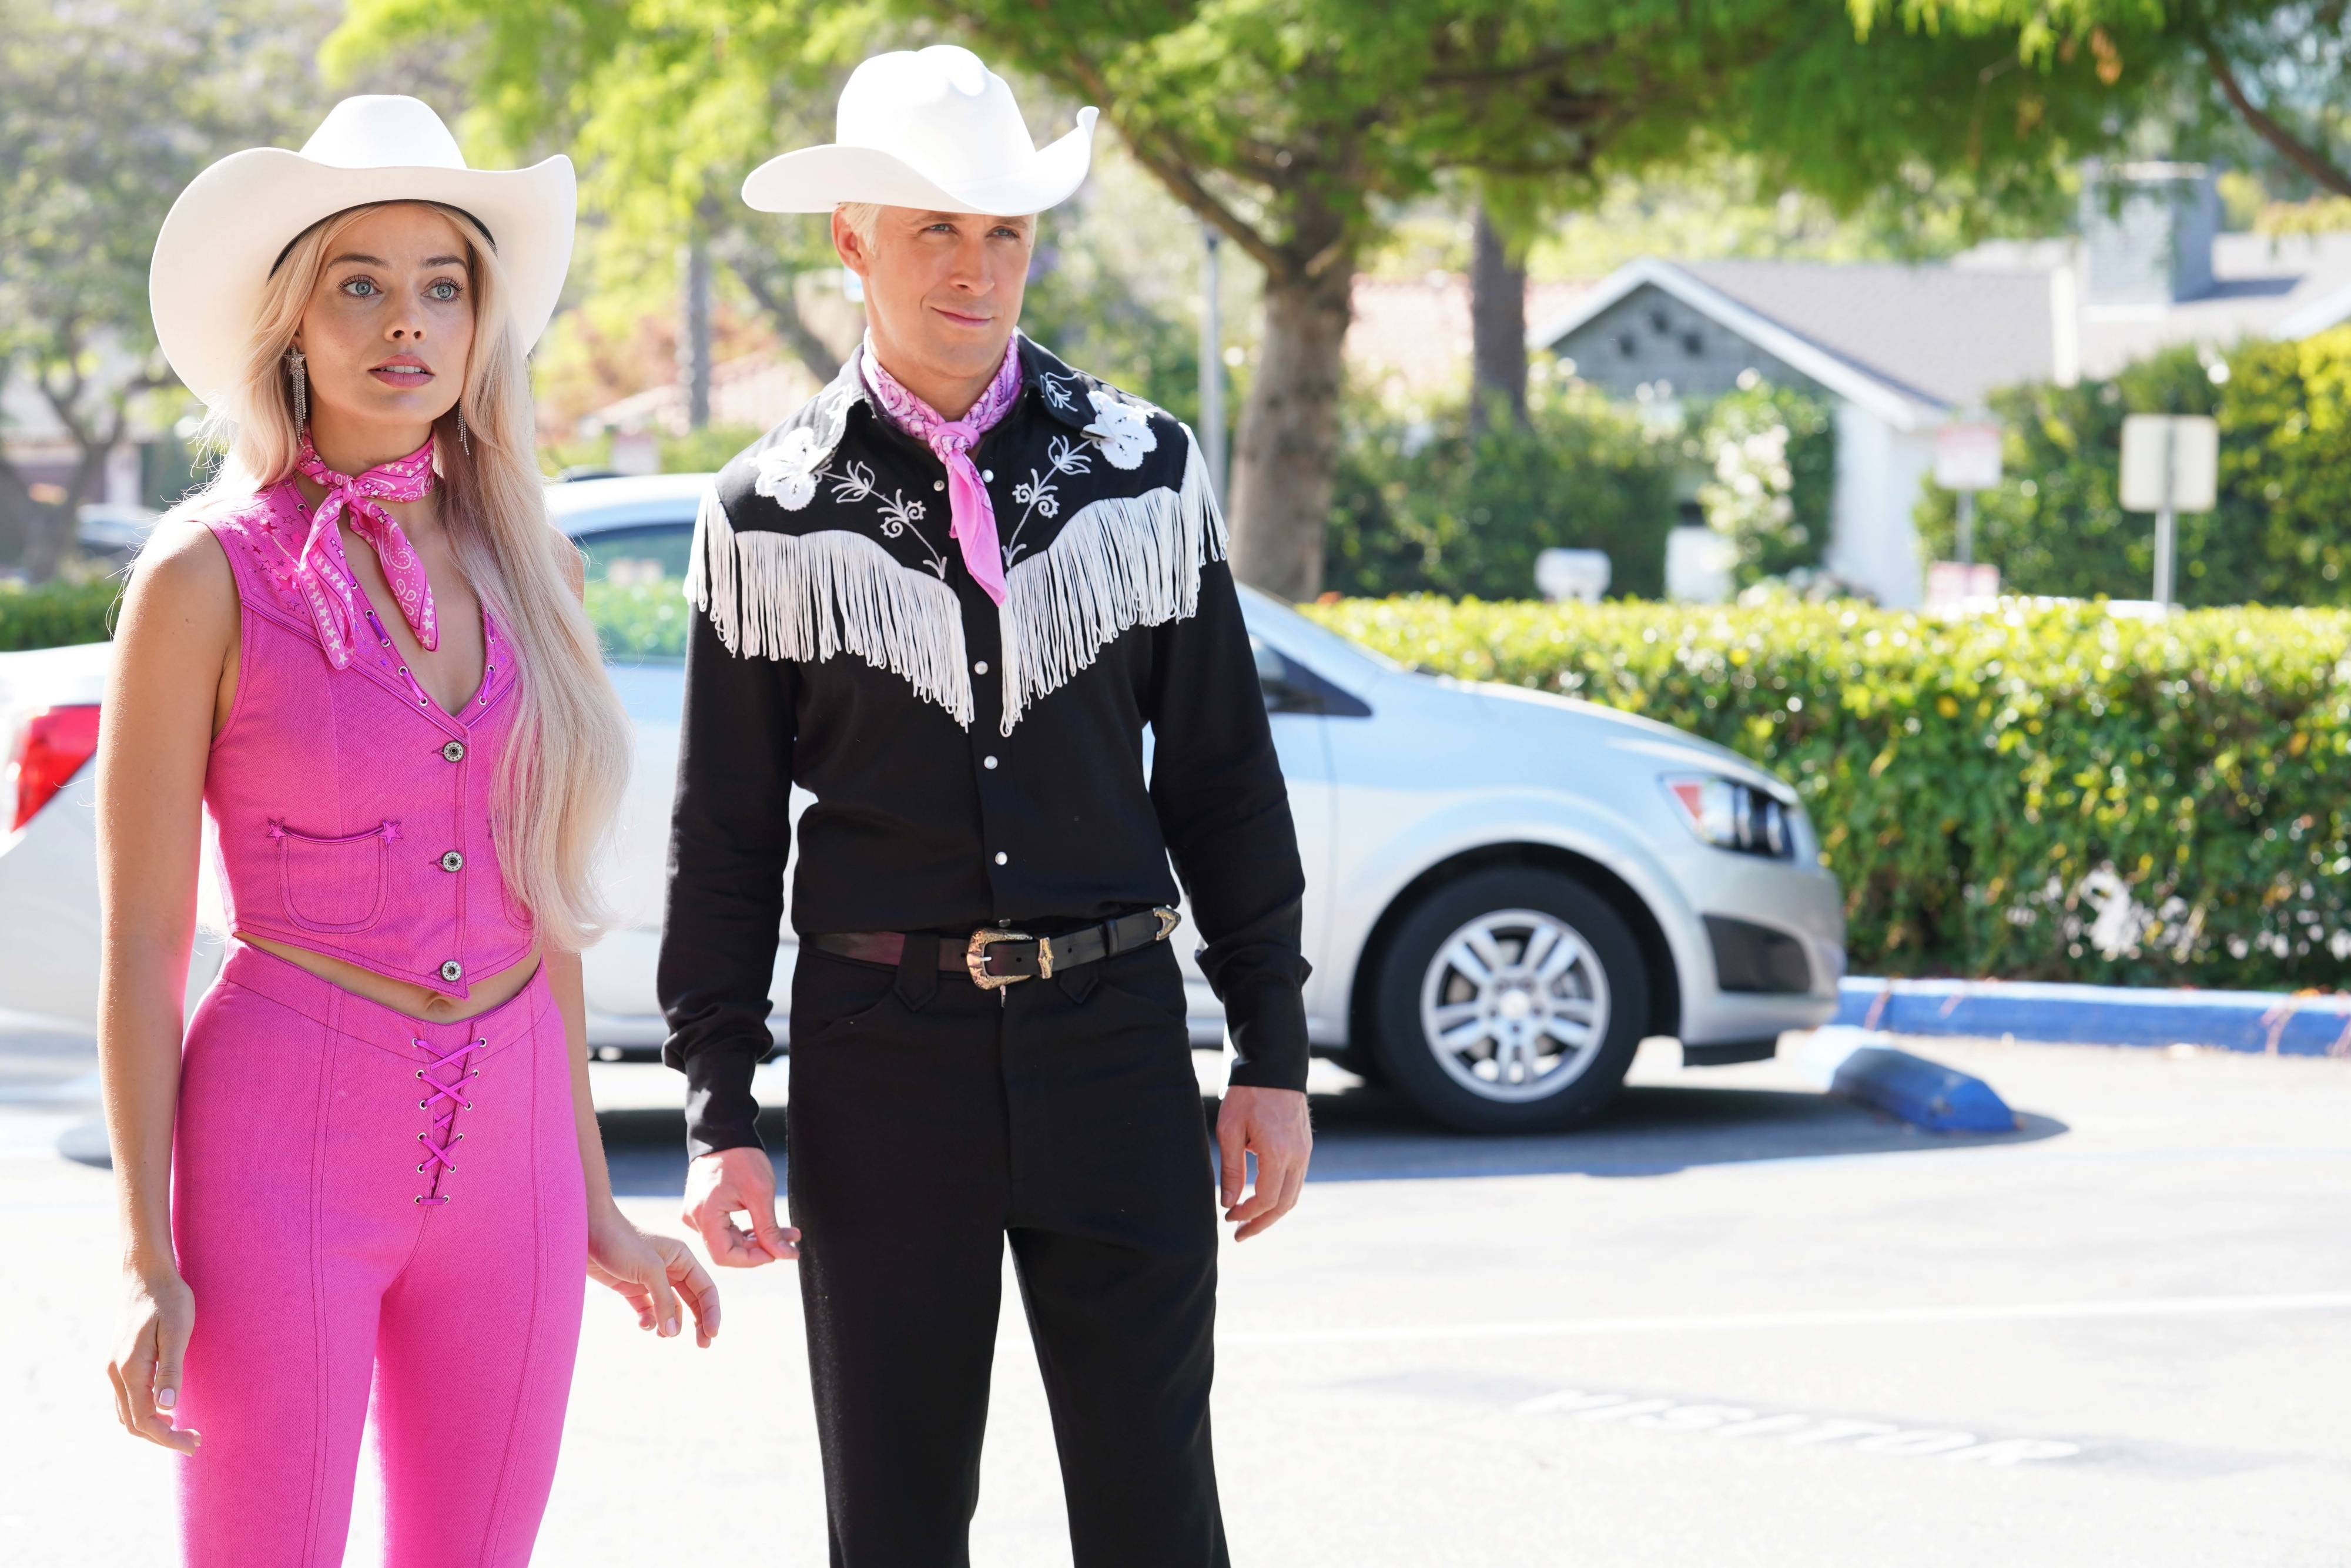 Margot and Ryan as Barbie and Ken dressed in western themed outfits including cowboy hats